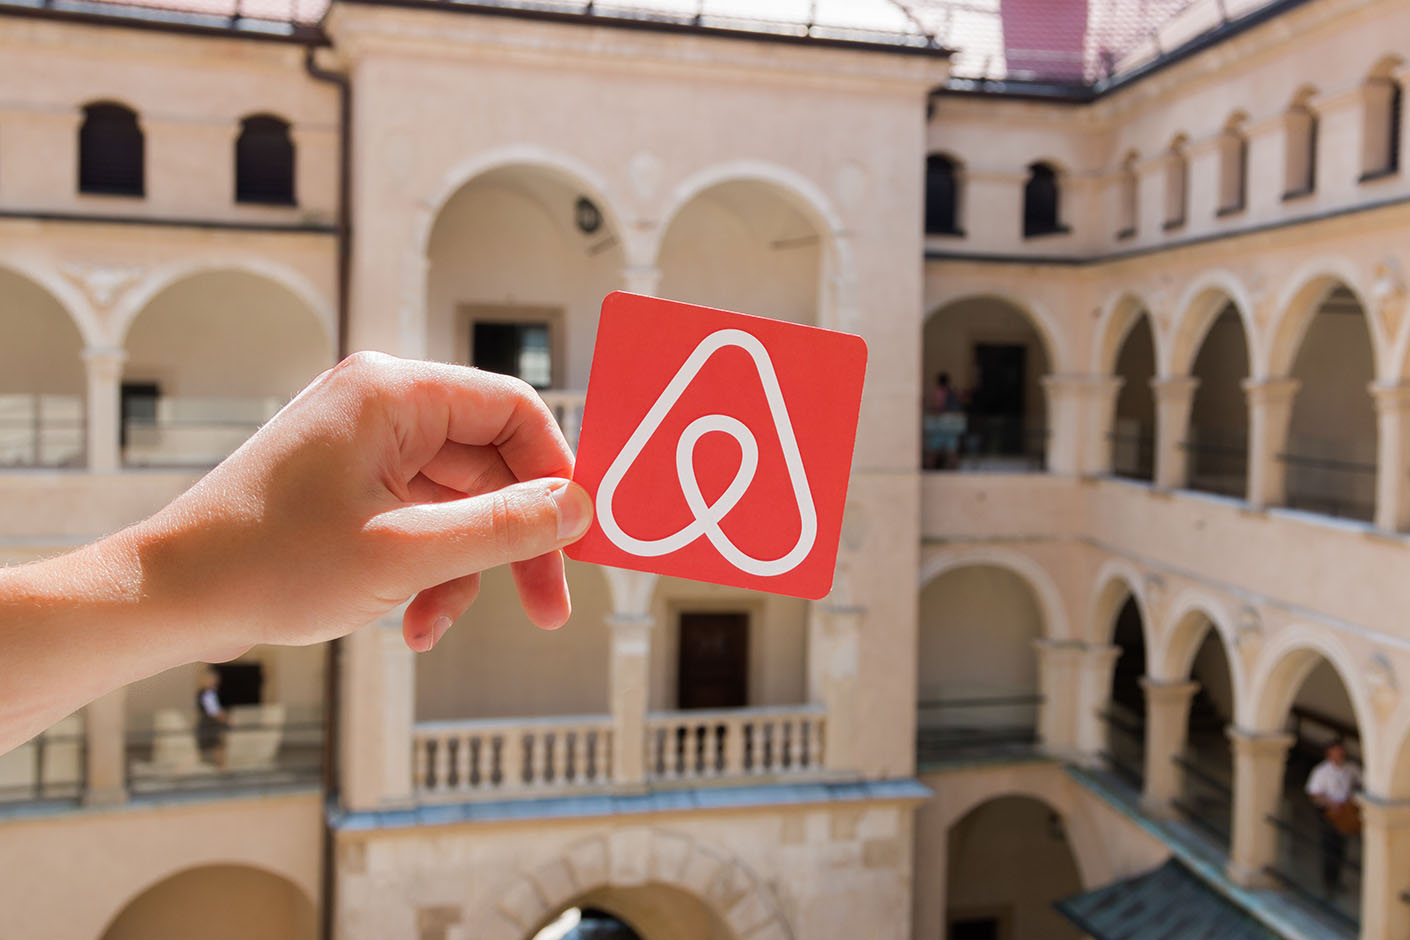 Airbnb’s response to the COVID-19